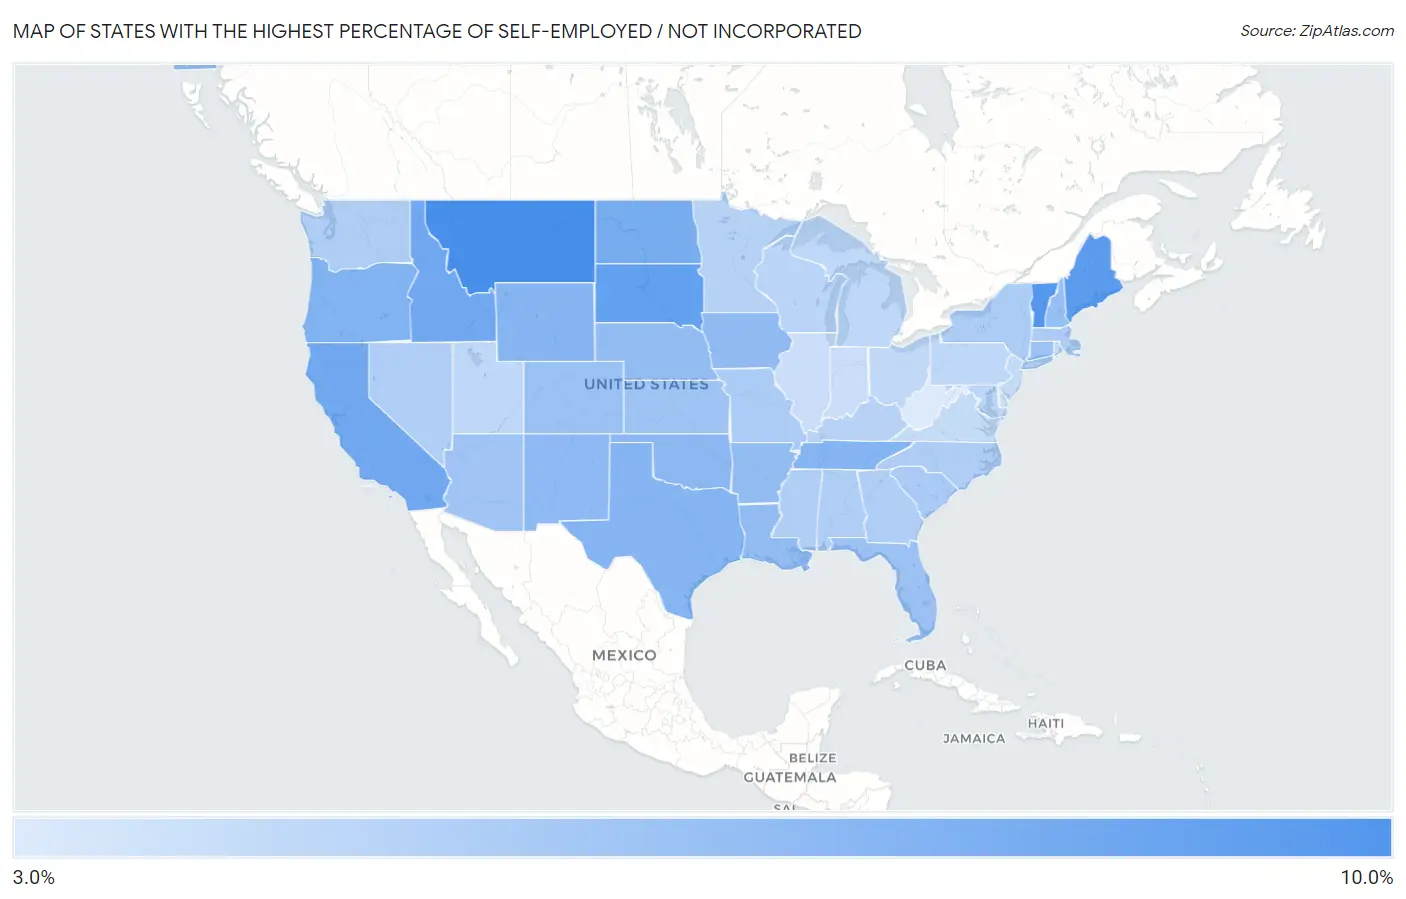 States with the Highest Percentage of Self-Employed / Not Incorporated in the United States Map